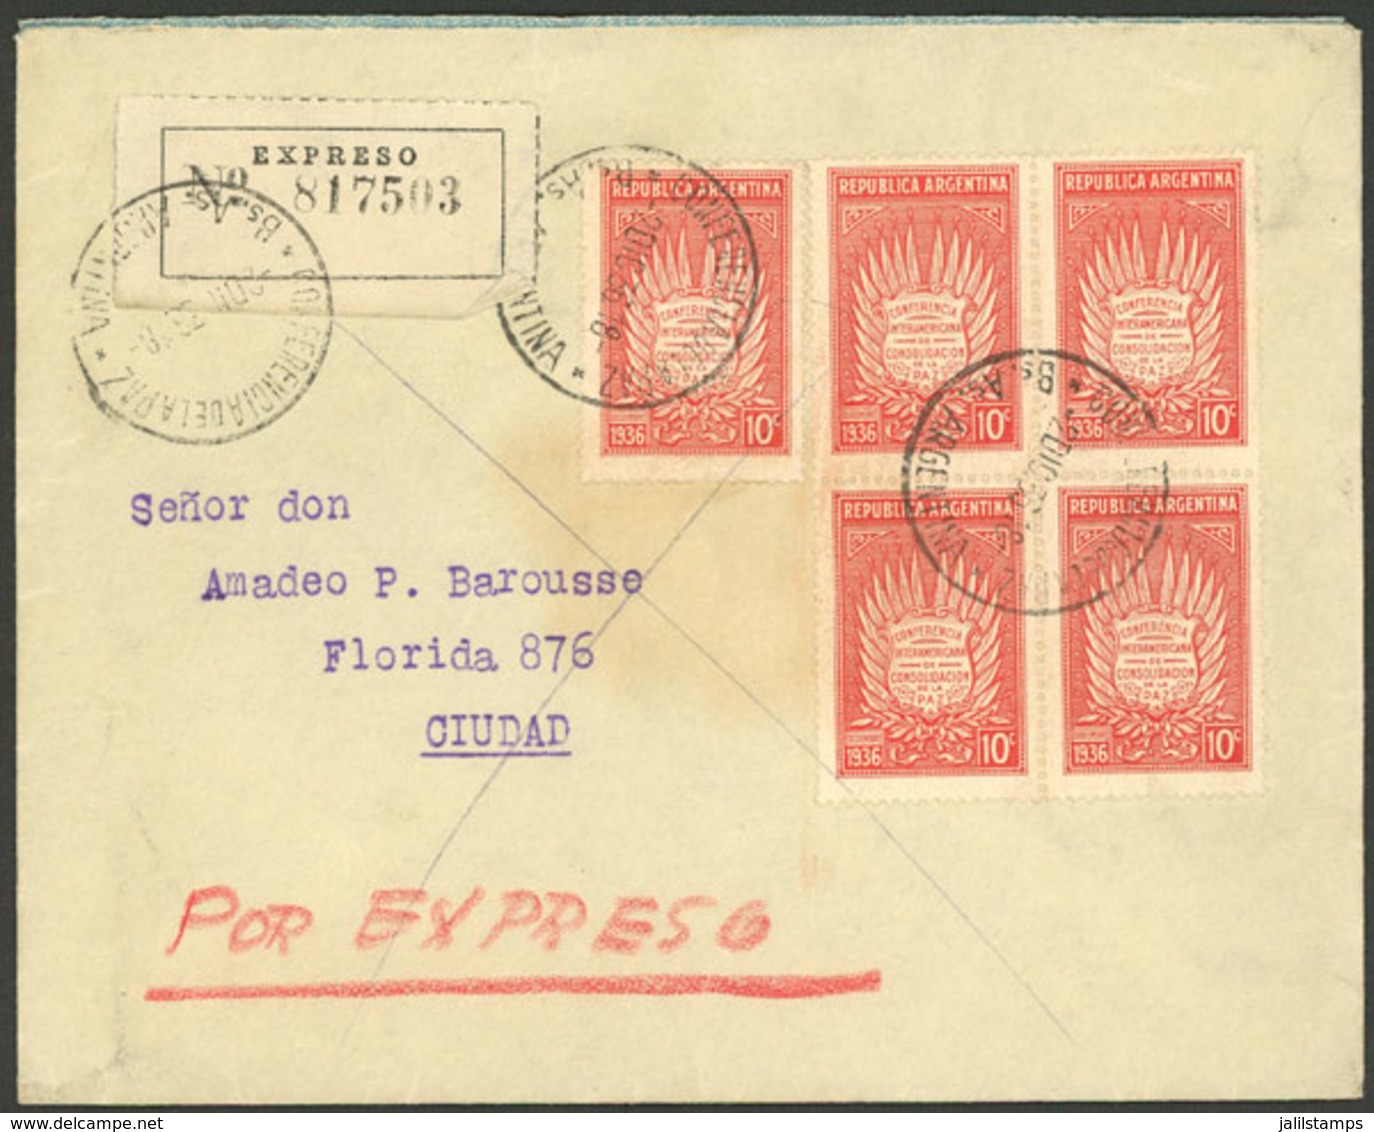 ARGENTINA: Express Cover Used In Buenos Aires On 2/DE/1936, With Stamps And Postmarks Commemorating The Peace Conference - Covers & Documents